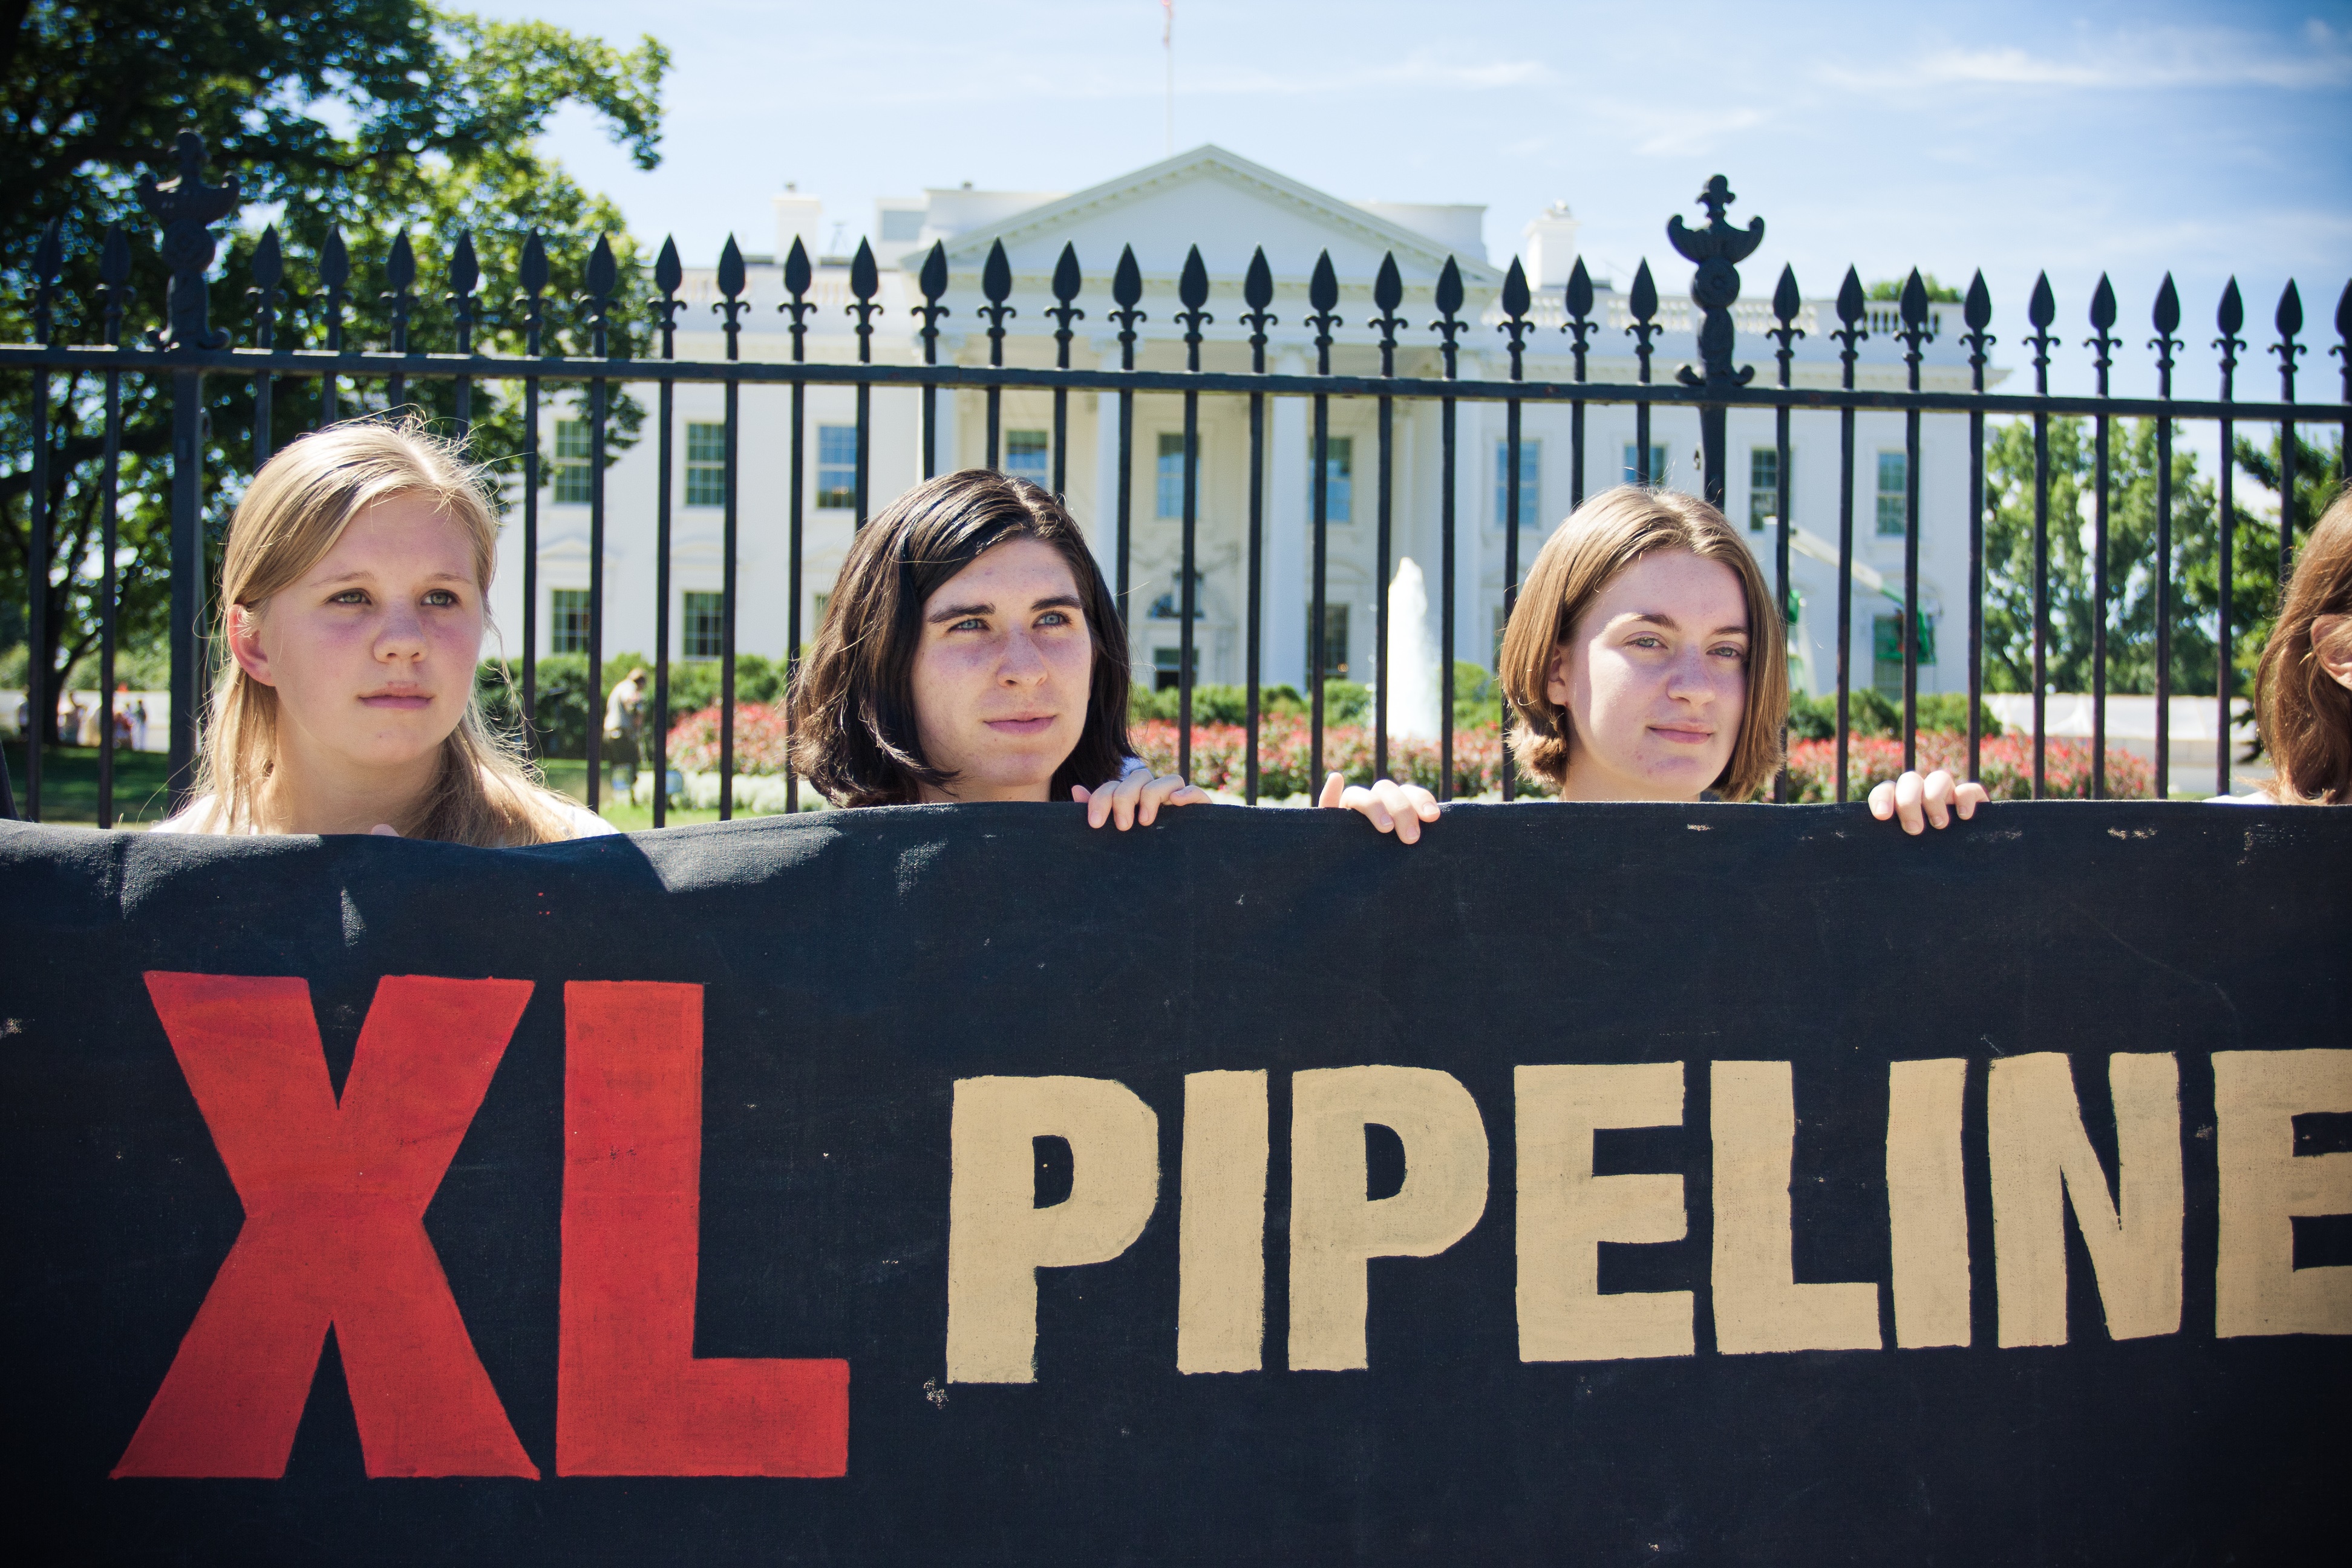 The Obama administration denied TransCanada a permit to build the Keystone XL pipeline in 2015 following big and active demonstrations, including this one at the White House. Photo courtesy of Creative Commons